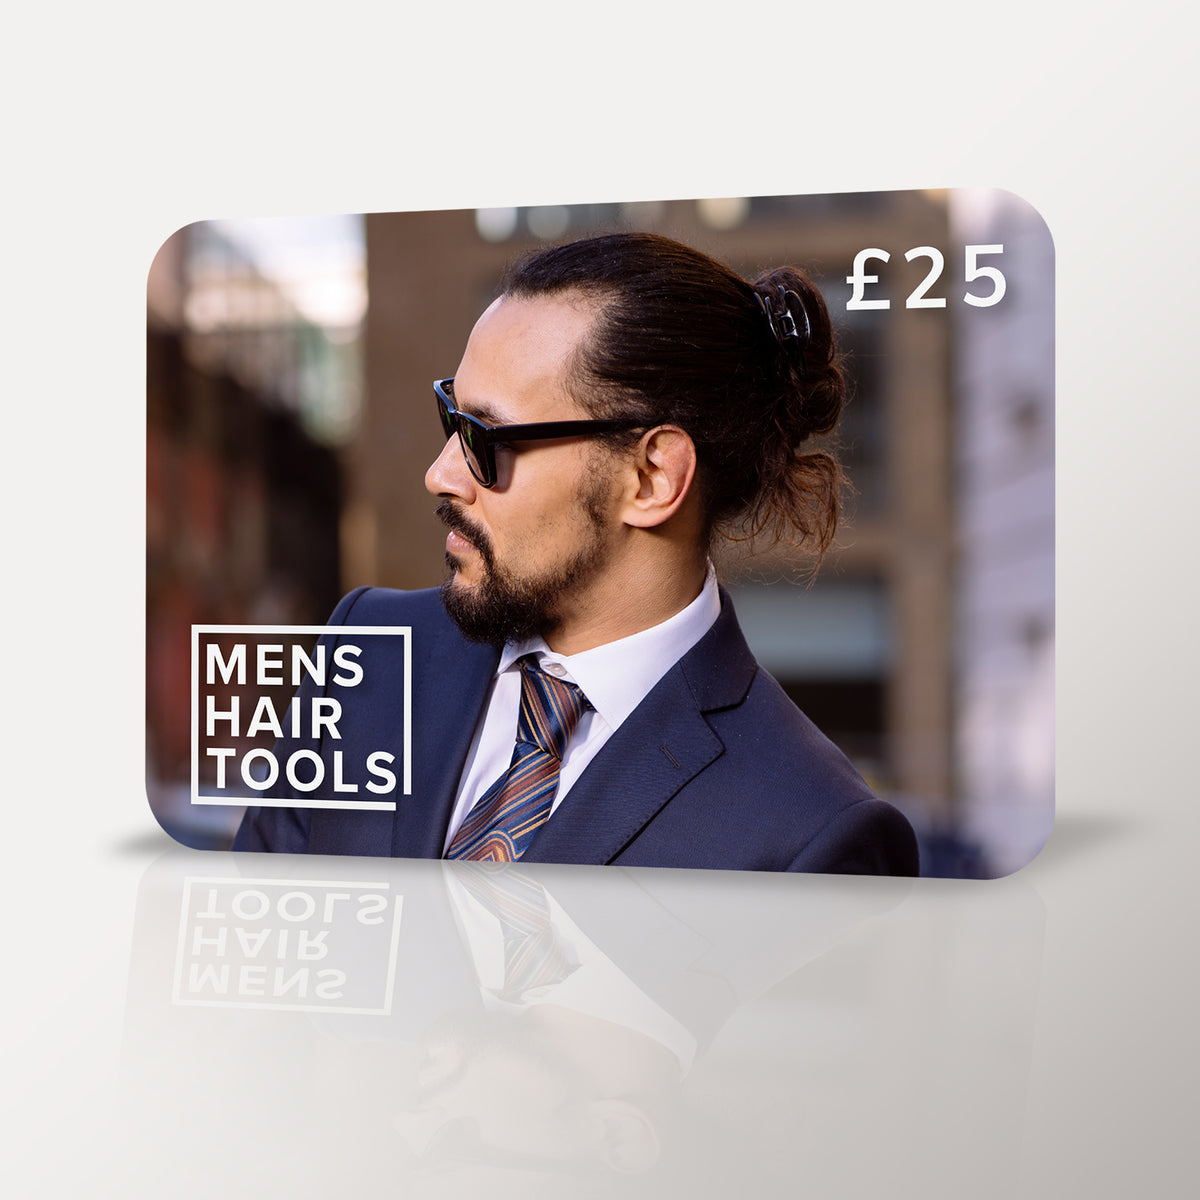 Mens-Hair-Tools-Twenty-Five-Pounds-Gift-Card